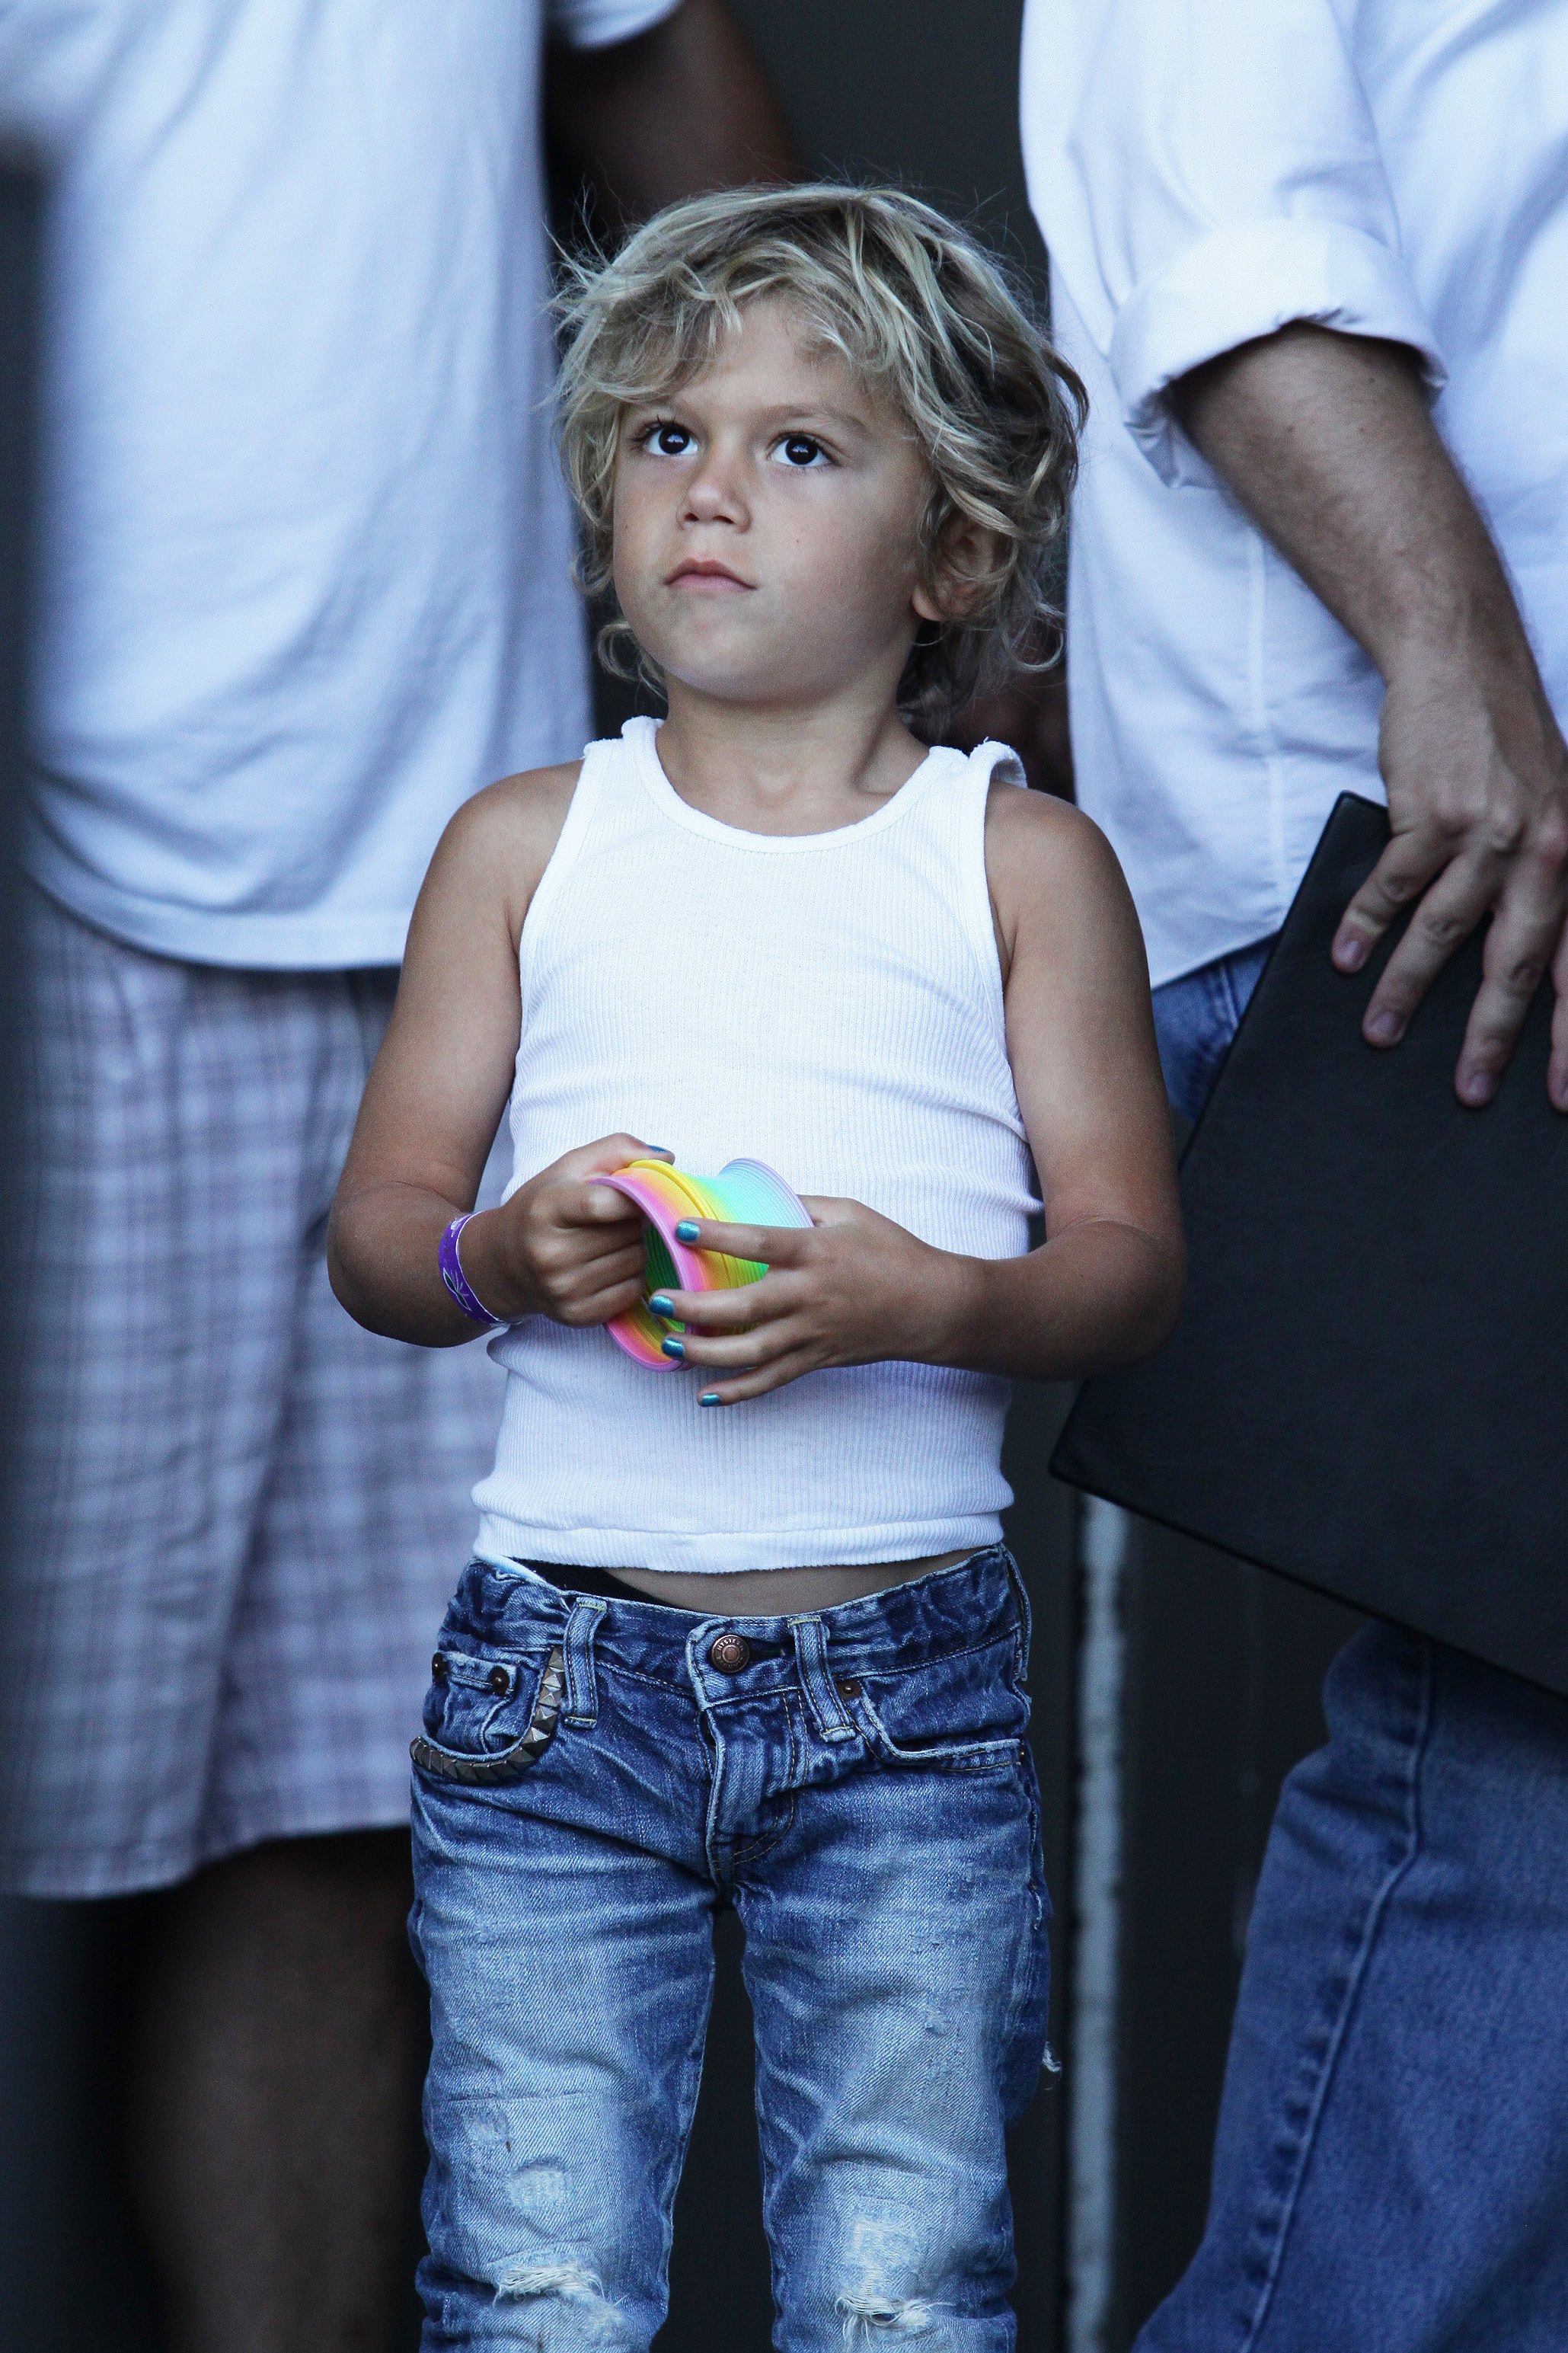 Kingston Rossdale watching his father perform at the Petrillo Band Shell in Grant Park in Chicago, Illinois on June 26, 2010 | Source: Getty Images